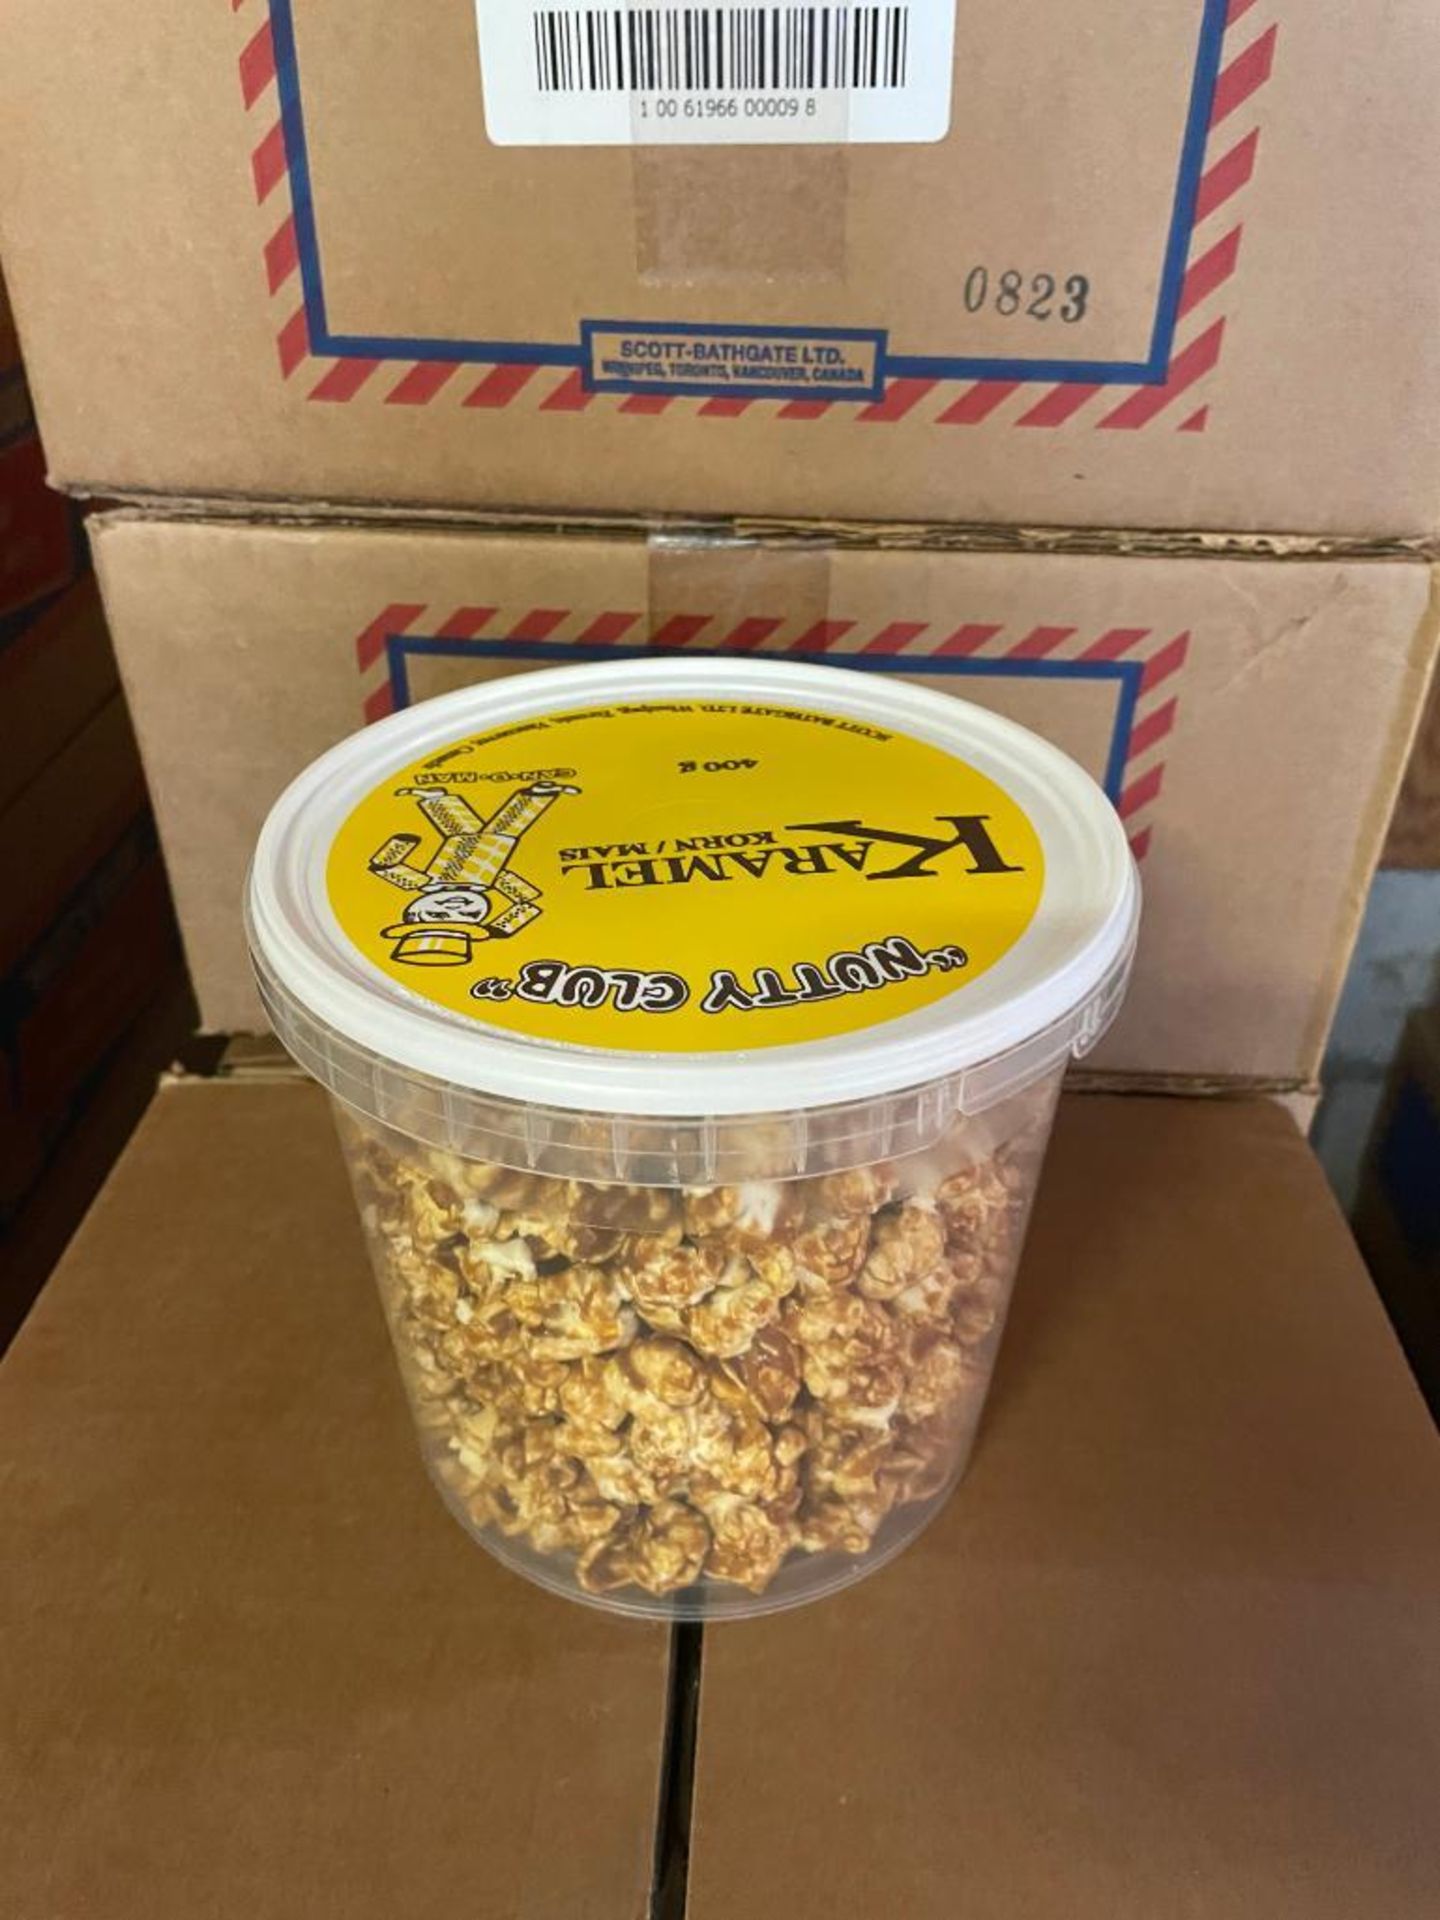 (12) CASES OF NUTTY CLUB KARAMEL CORN TUBS, 6/400G TUBS PER CASE - Image 3 of 3